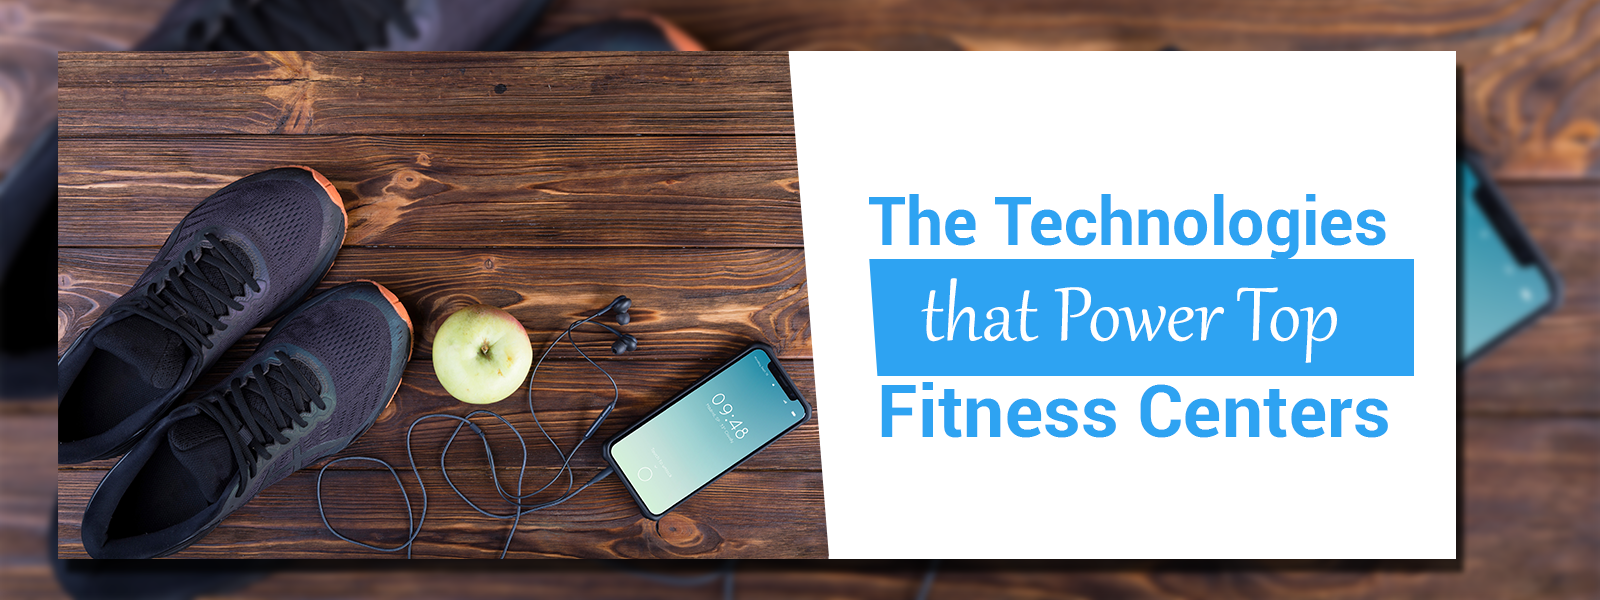 the technologies that power top fitness centers